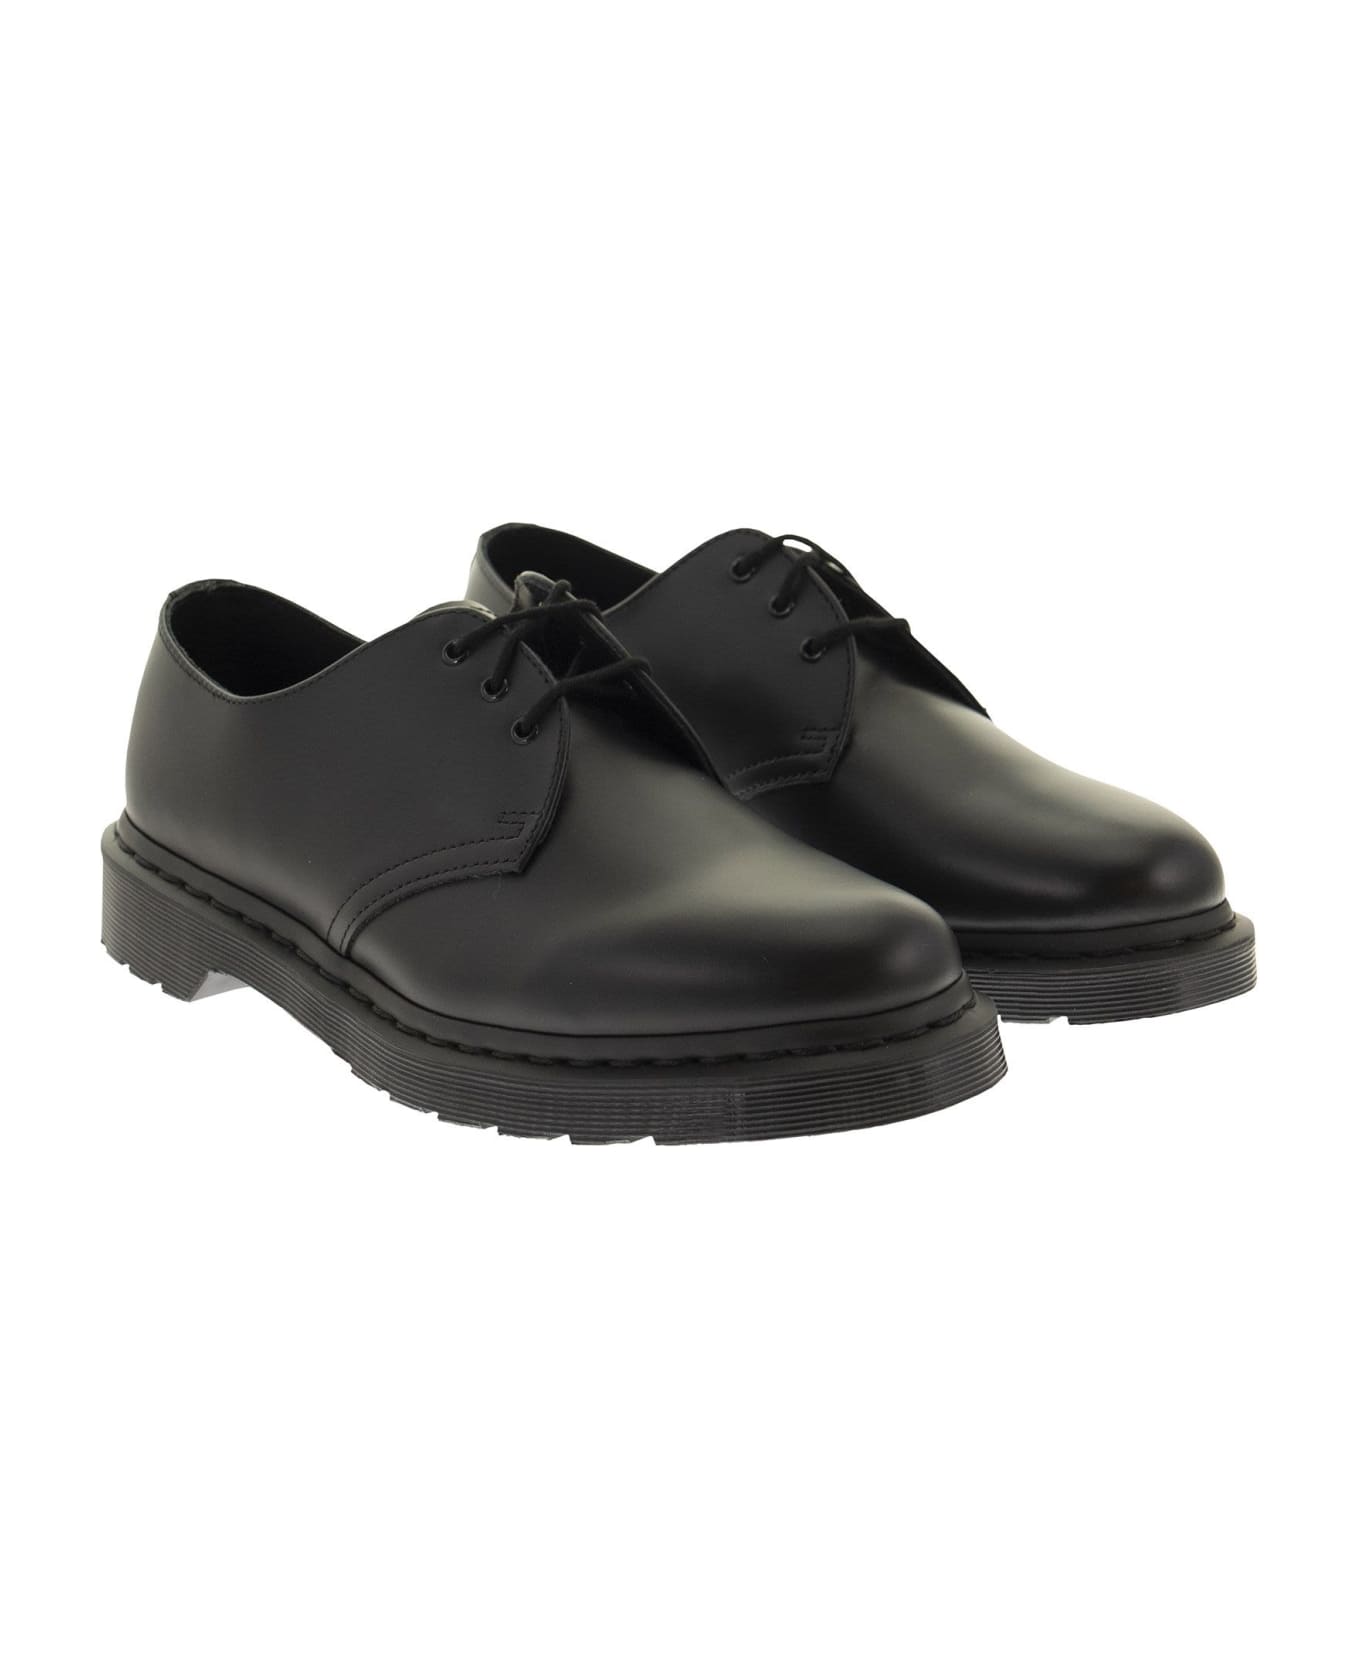 Dr. Martens 1461 Mono - Leather Lace-up - Black ローファー＆デッキシューズ